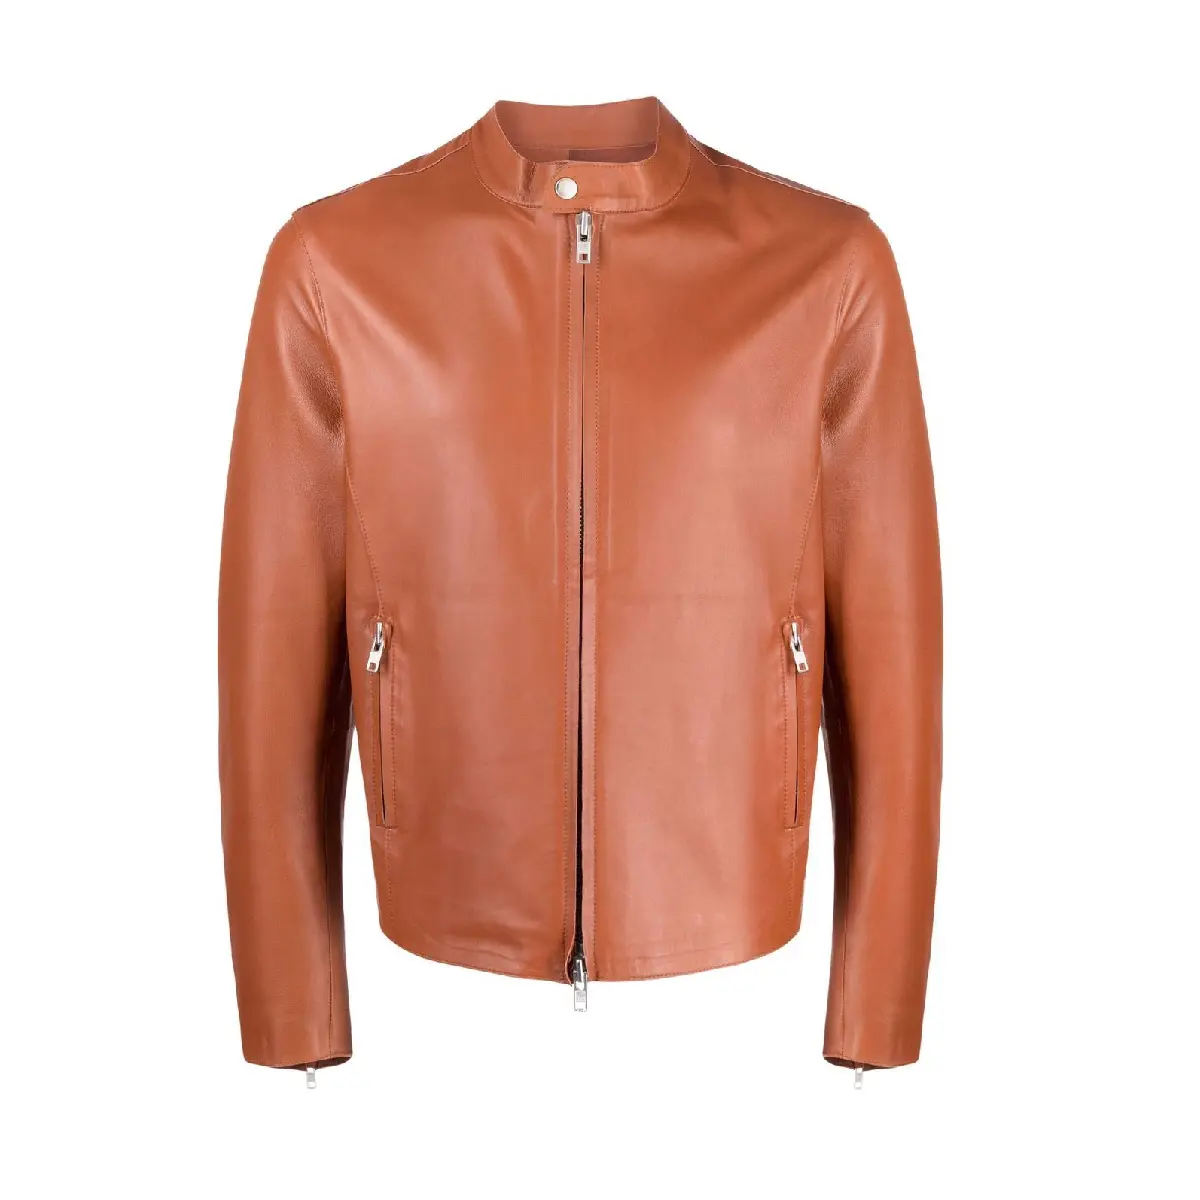 Most Popular Top Quality custom Men's Leather Jackets Made Top Product Leather Jacket Customized Leather Jacket Zipper Design